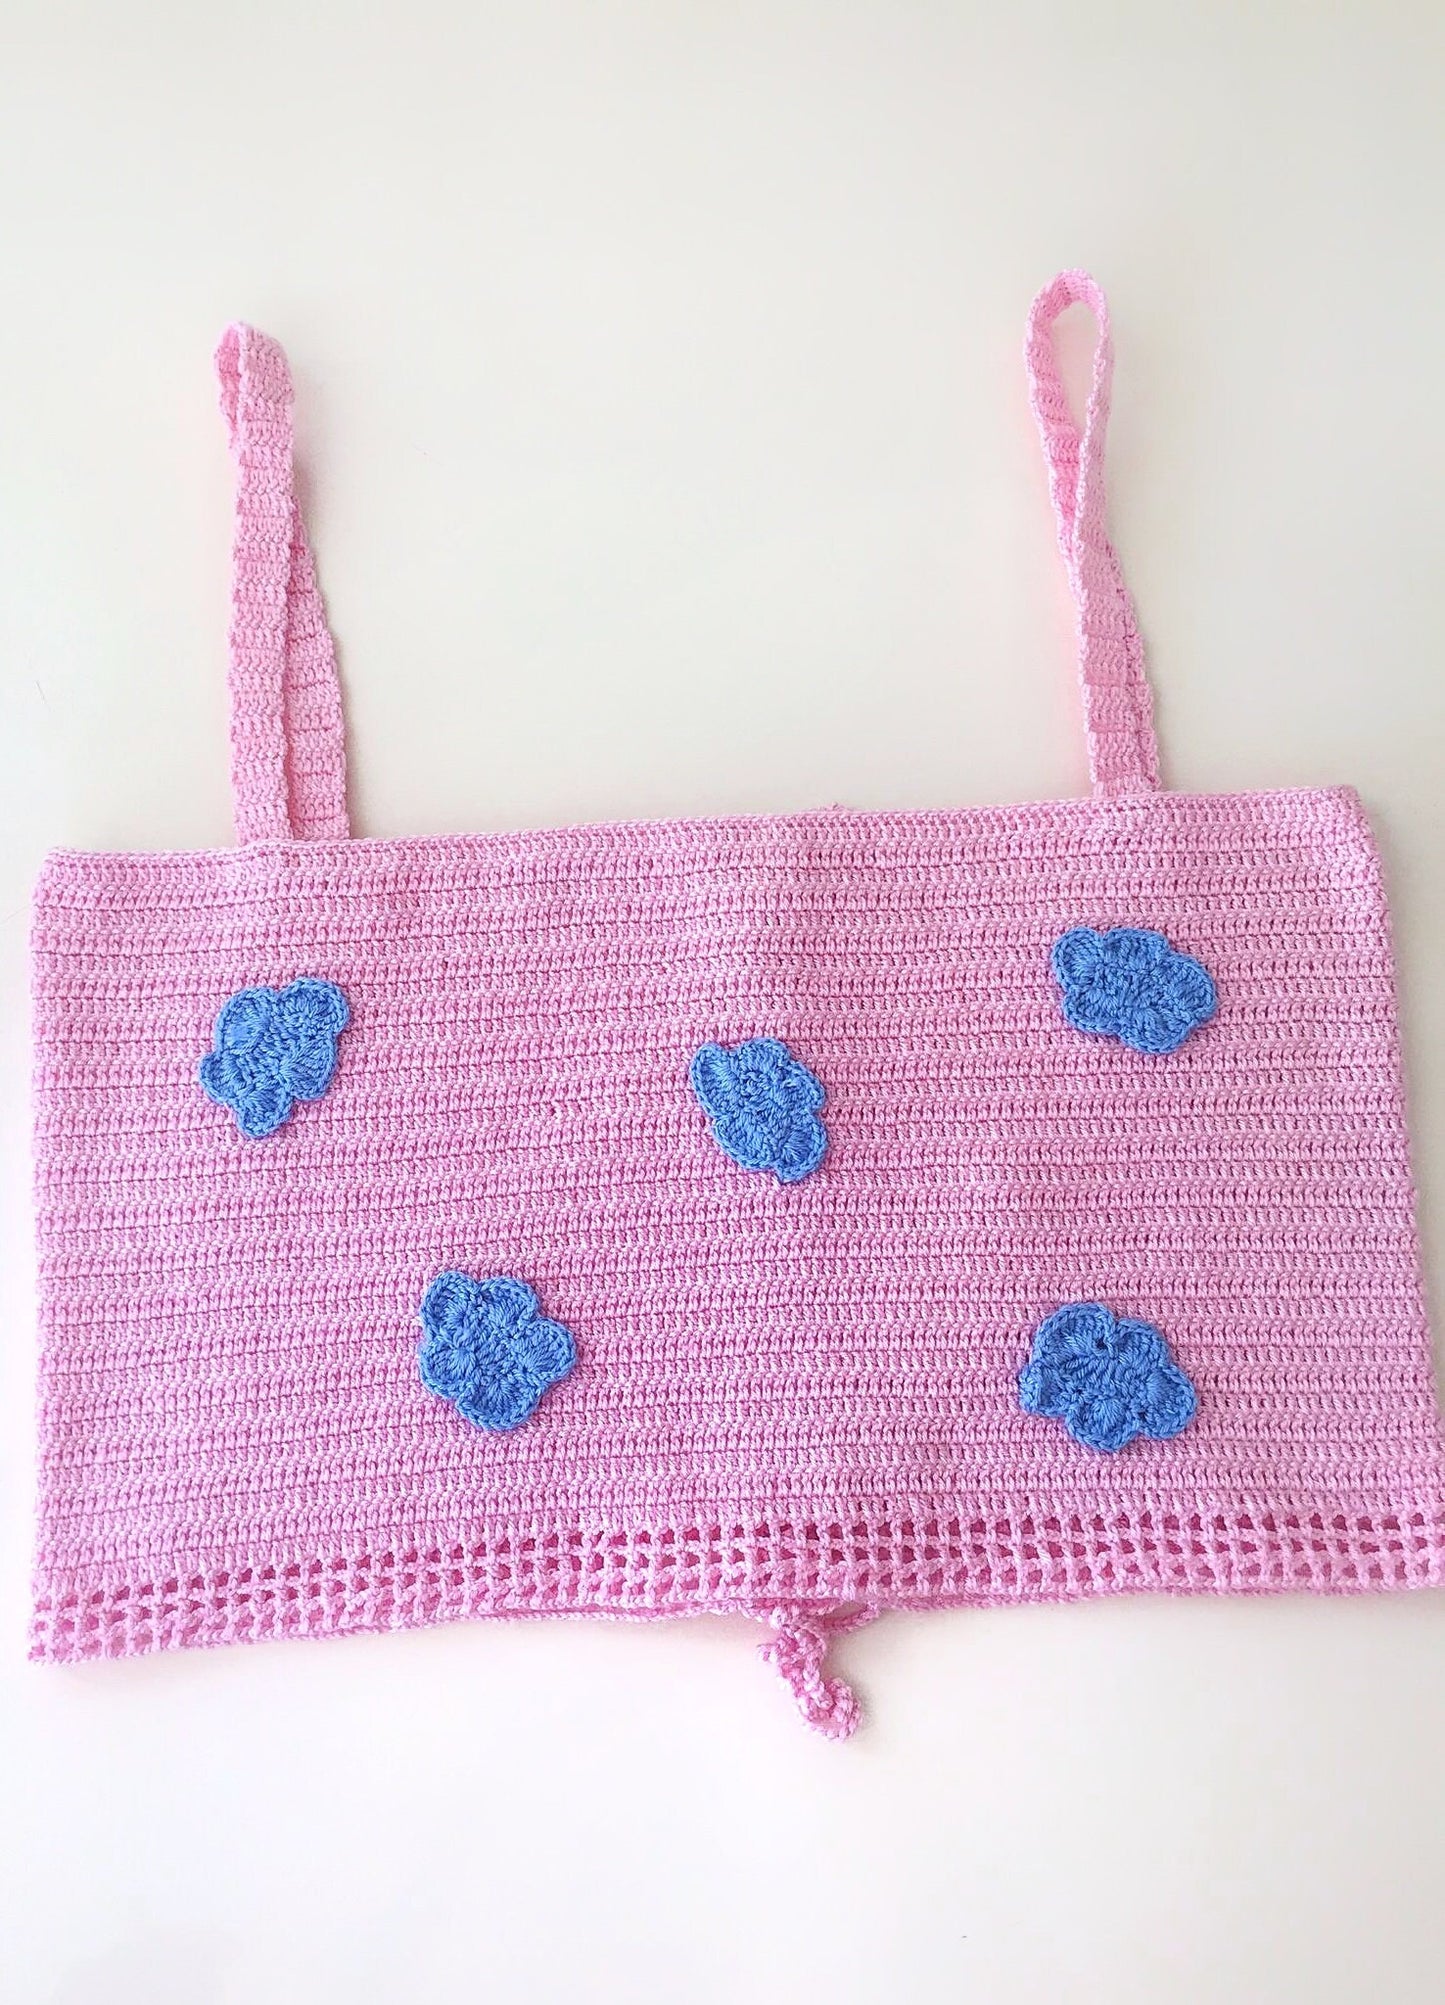 Candy Pink Crochet Top with Clouds